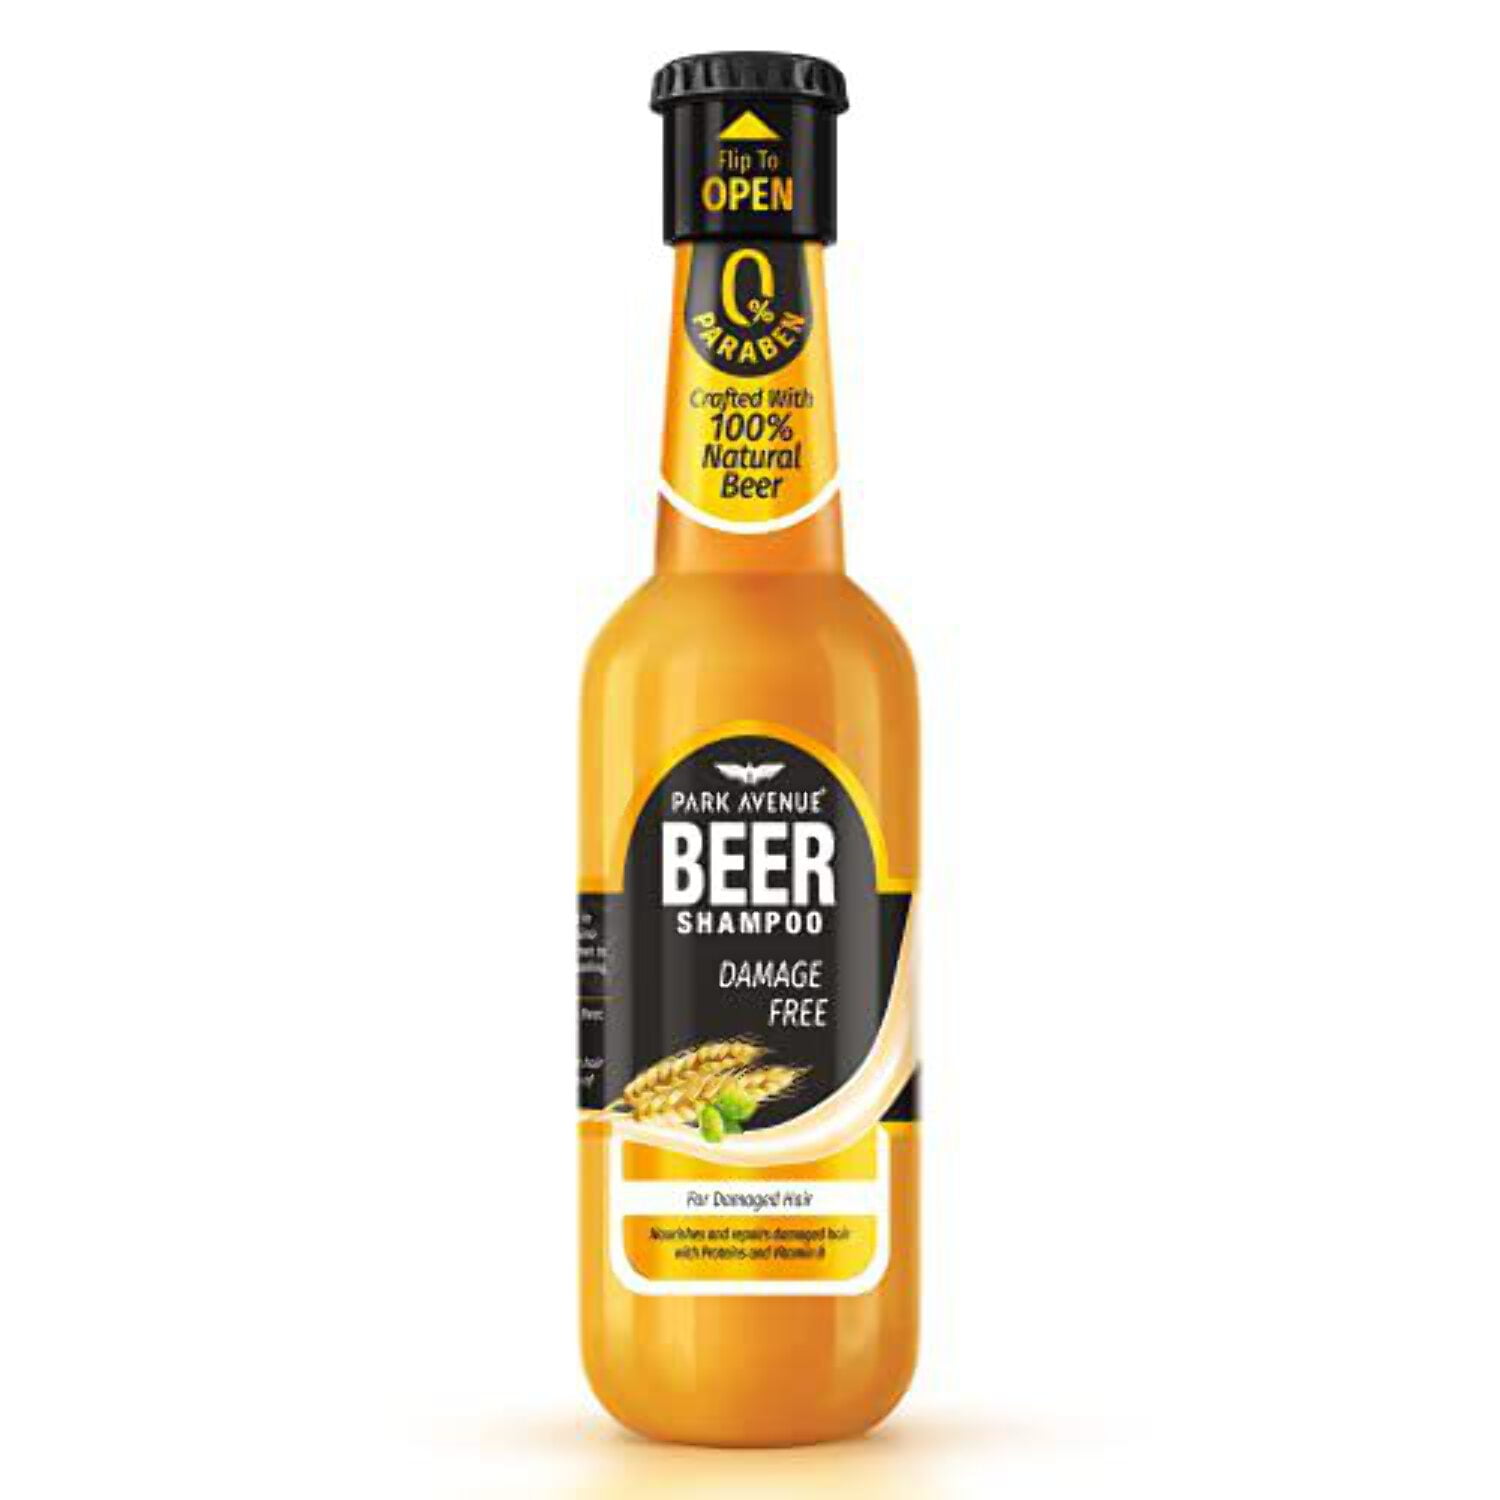 Park Avenue Beer shampoo for Damage Free hair, with Hops, Barley, Proteins  and Vit. B, 180ml 